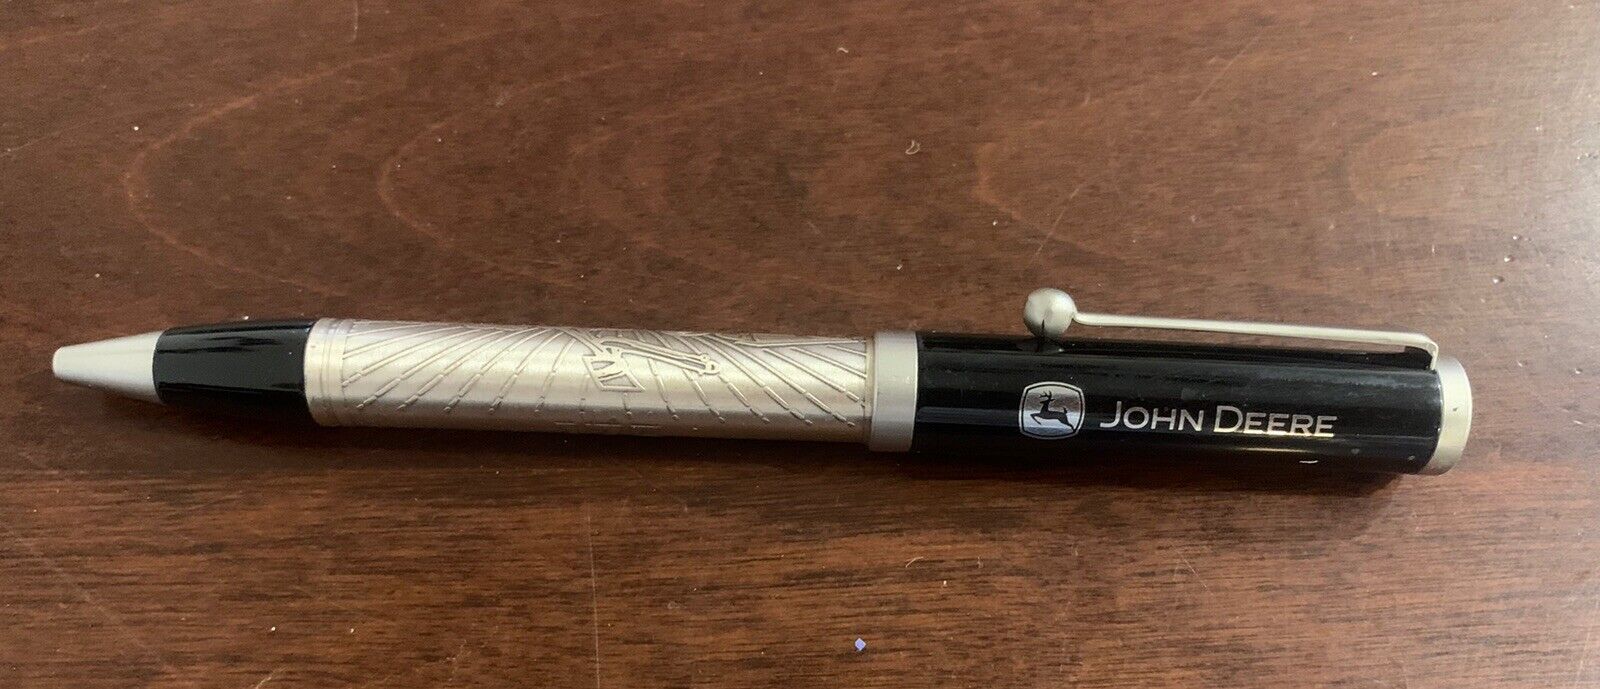 JOHN DEERE 175 Year Anniversary Etched Ball Point Pen Employee Gift